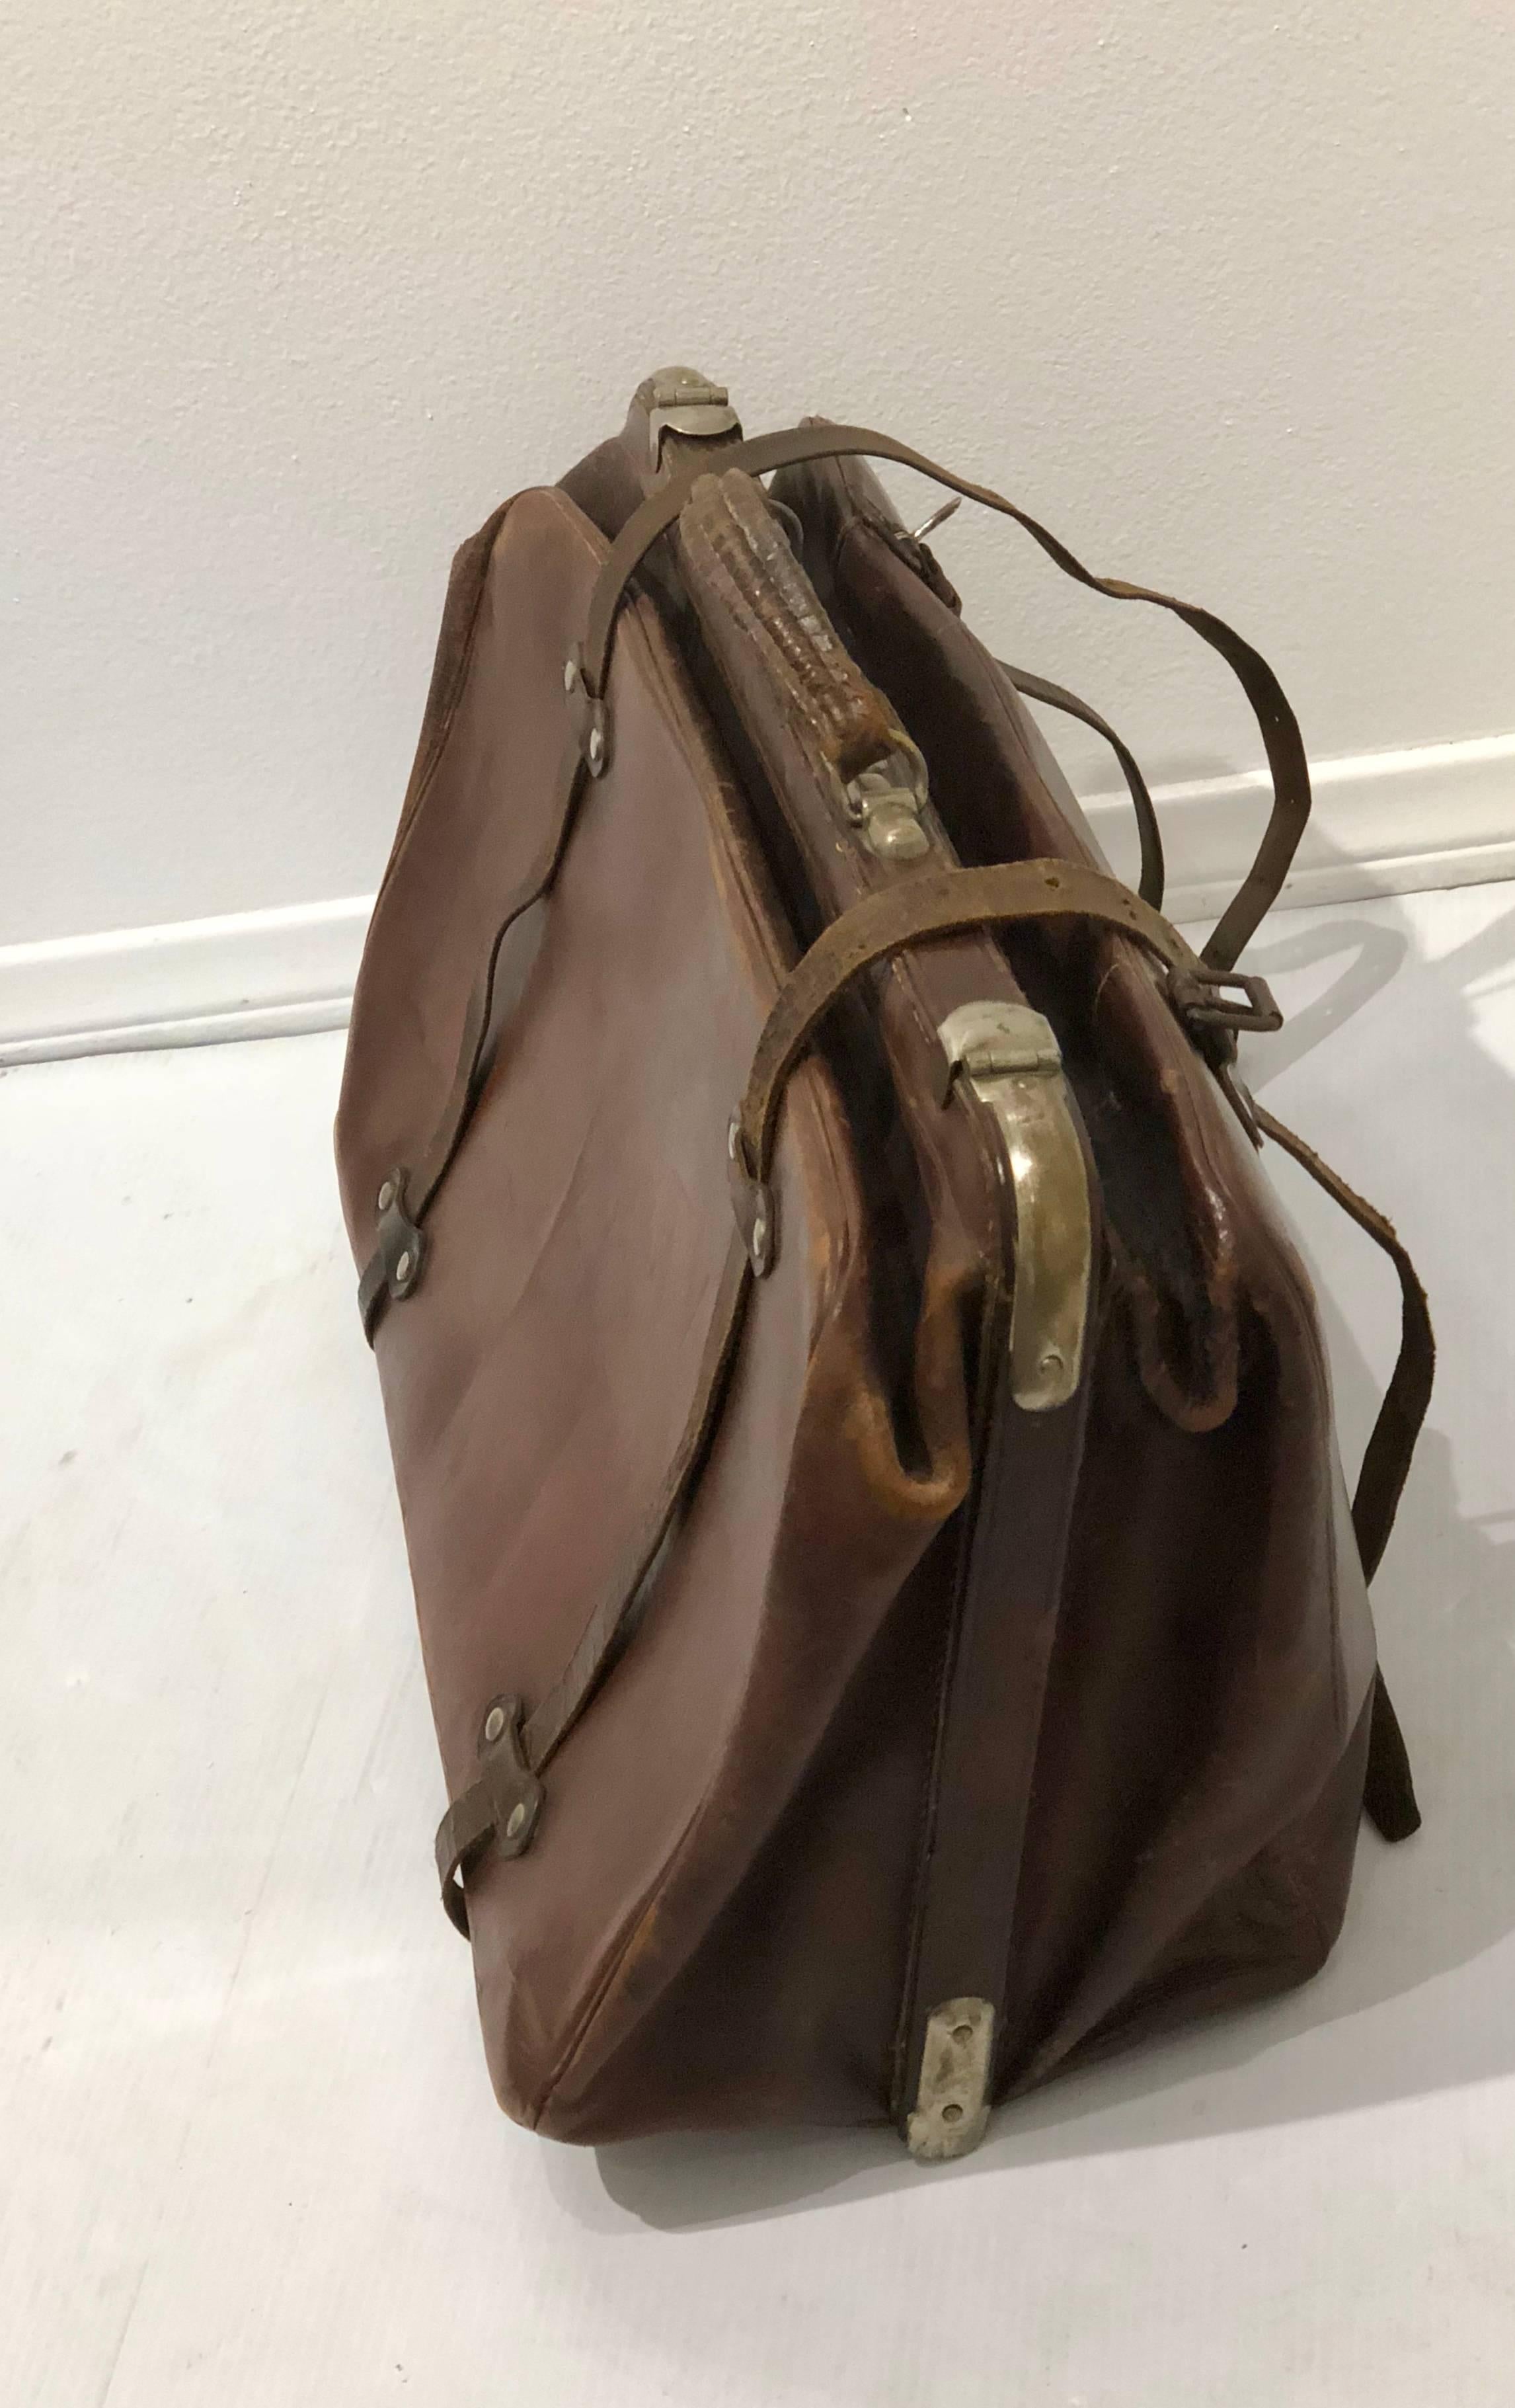 Beautiful and rare brown leather luggage doctors bag, with nice orange insert and walnut divider, nice distressed leather finish.